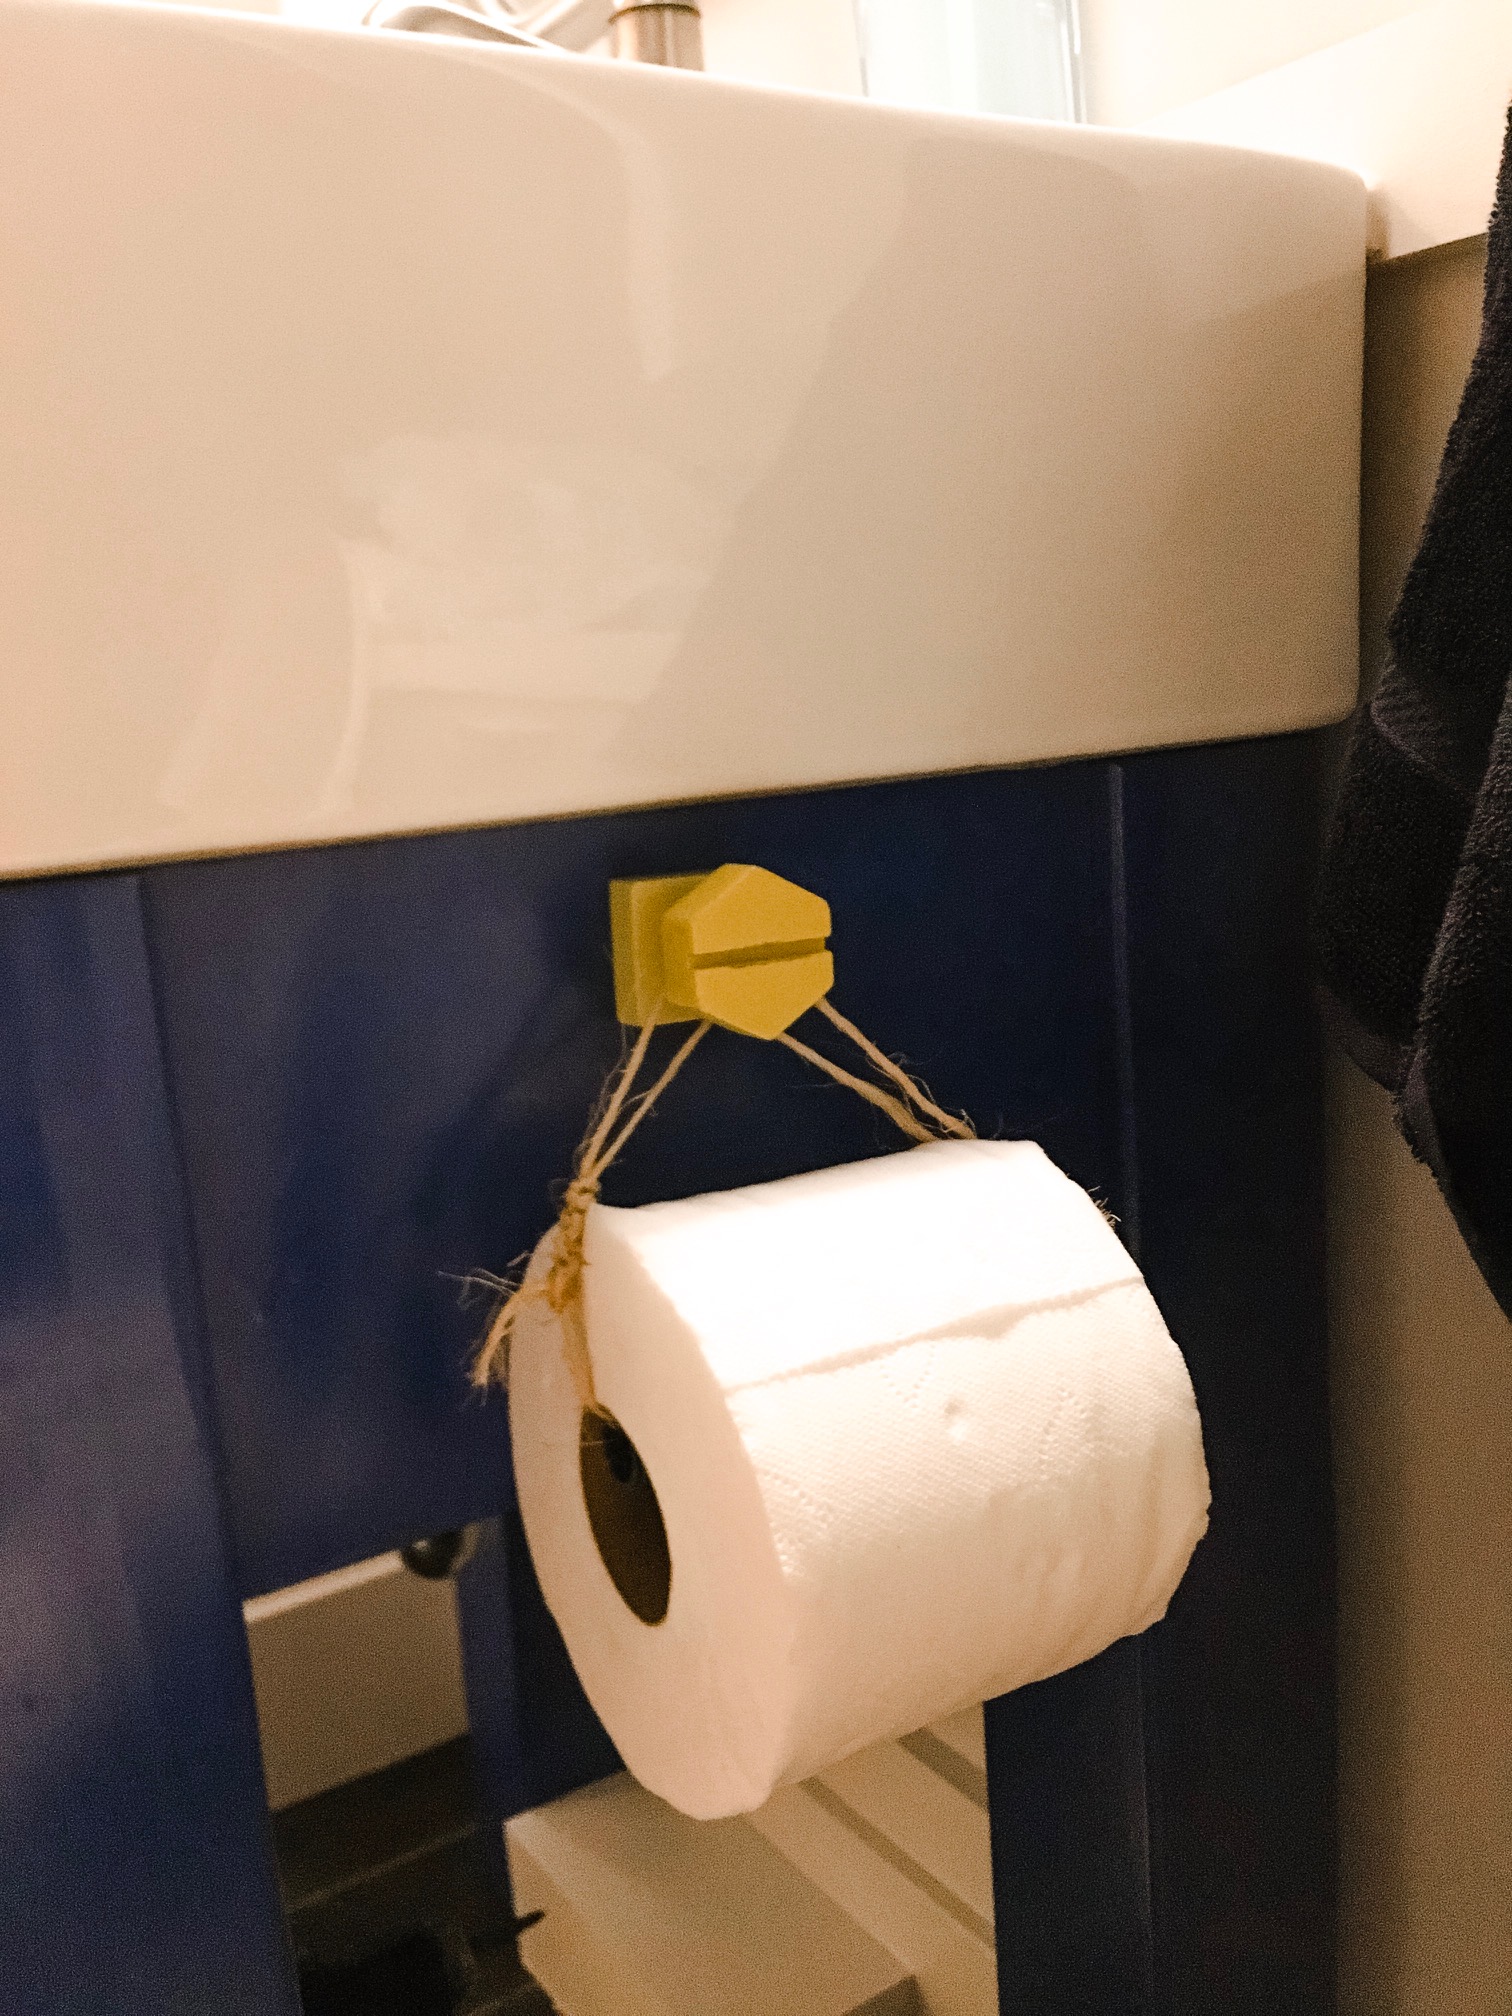 DIY Toy Toilet Paper Roll Holder